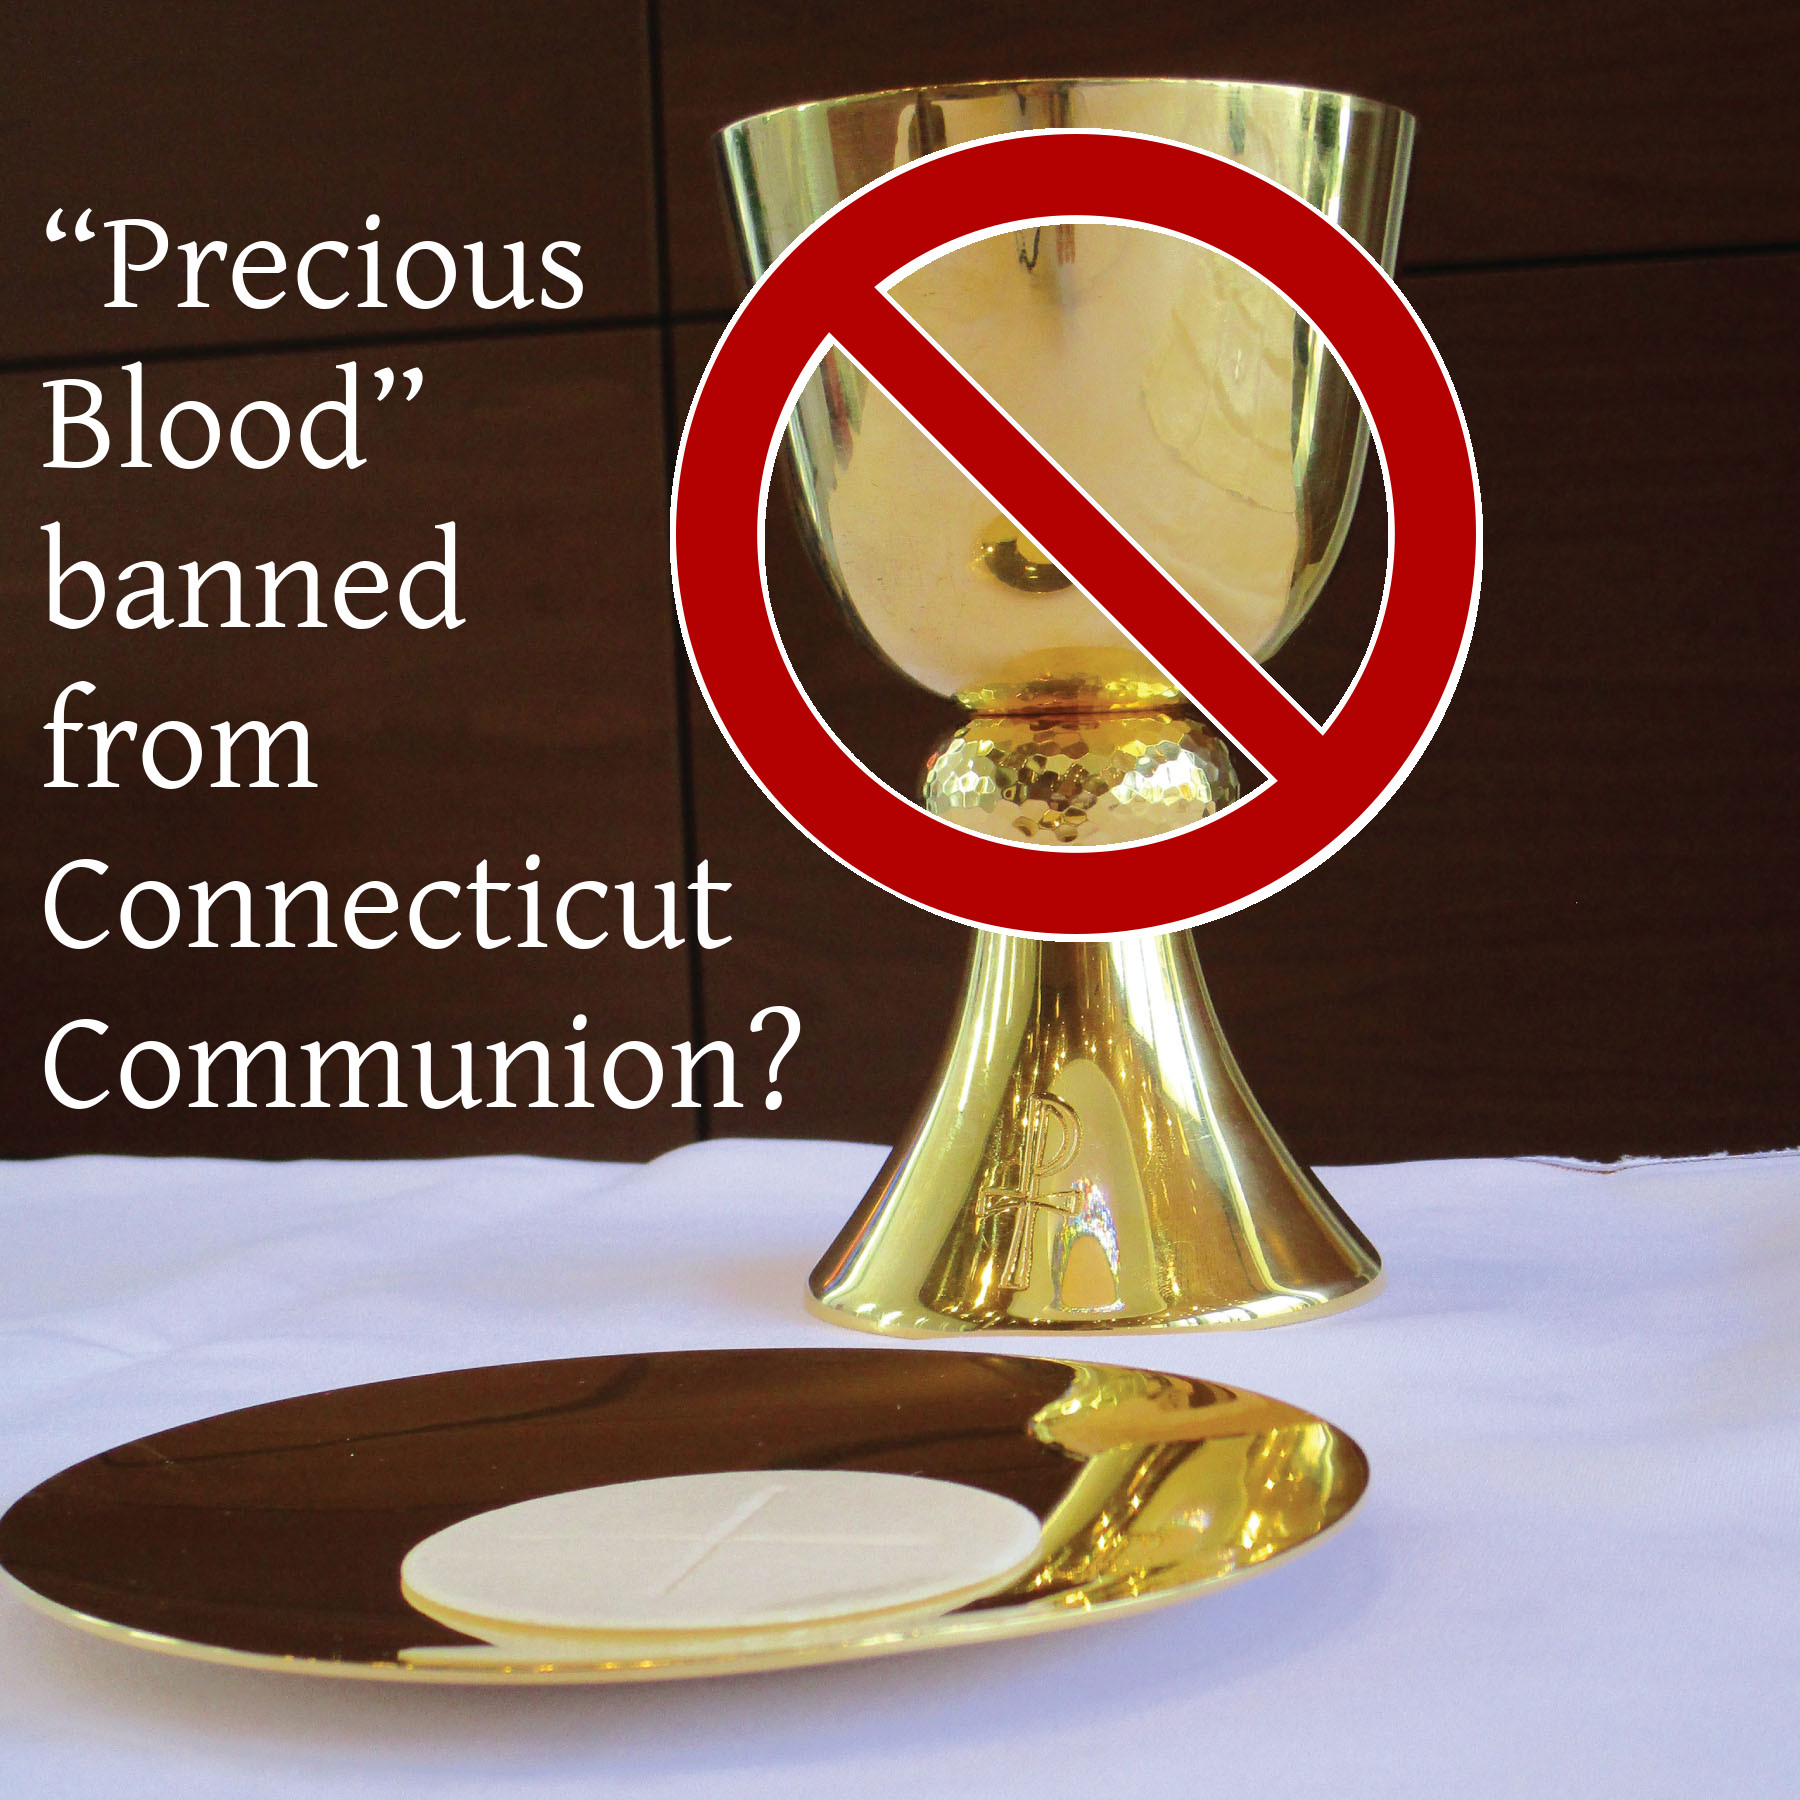 blood banned from communion